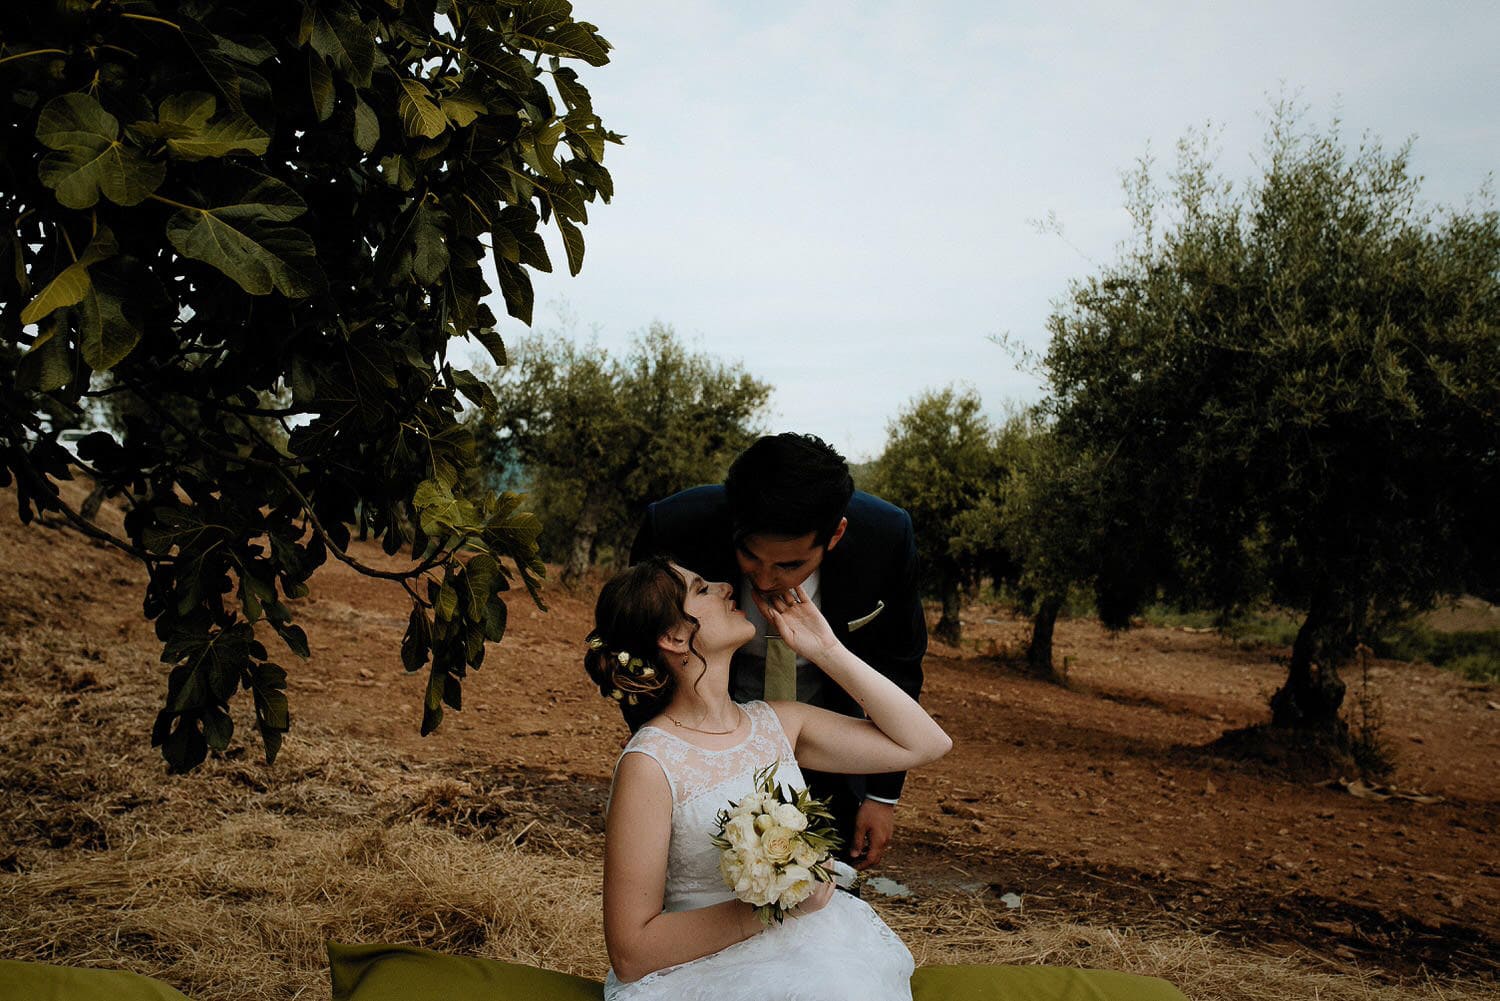 Charming Destination Wedding in the Portuguese Countryside - bride and groom kissing surrounded by olive trees